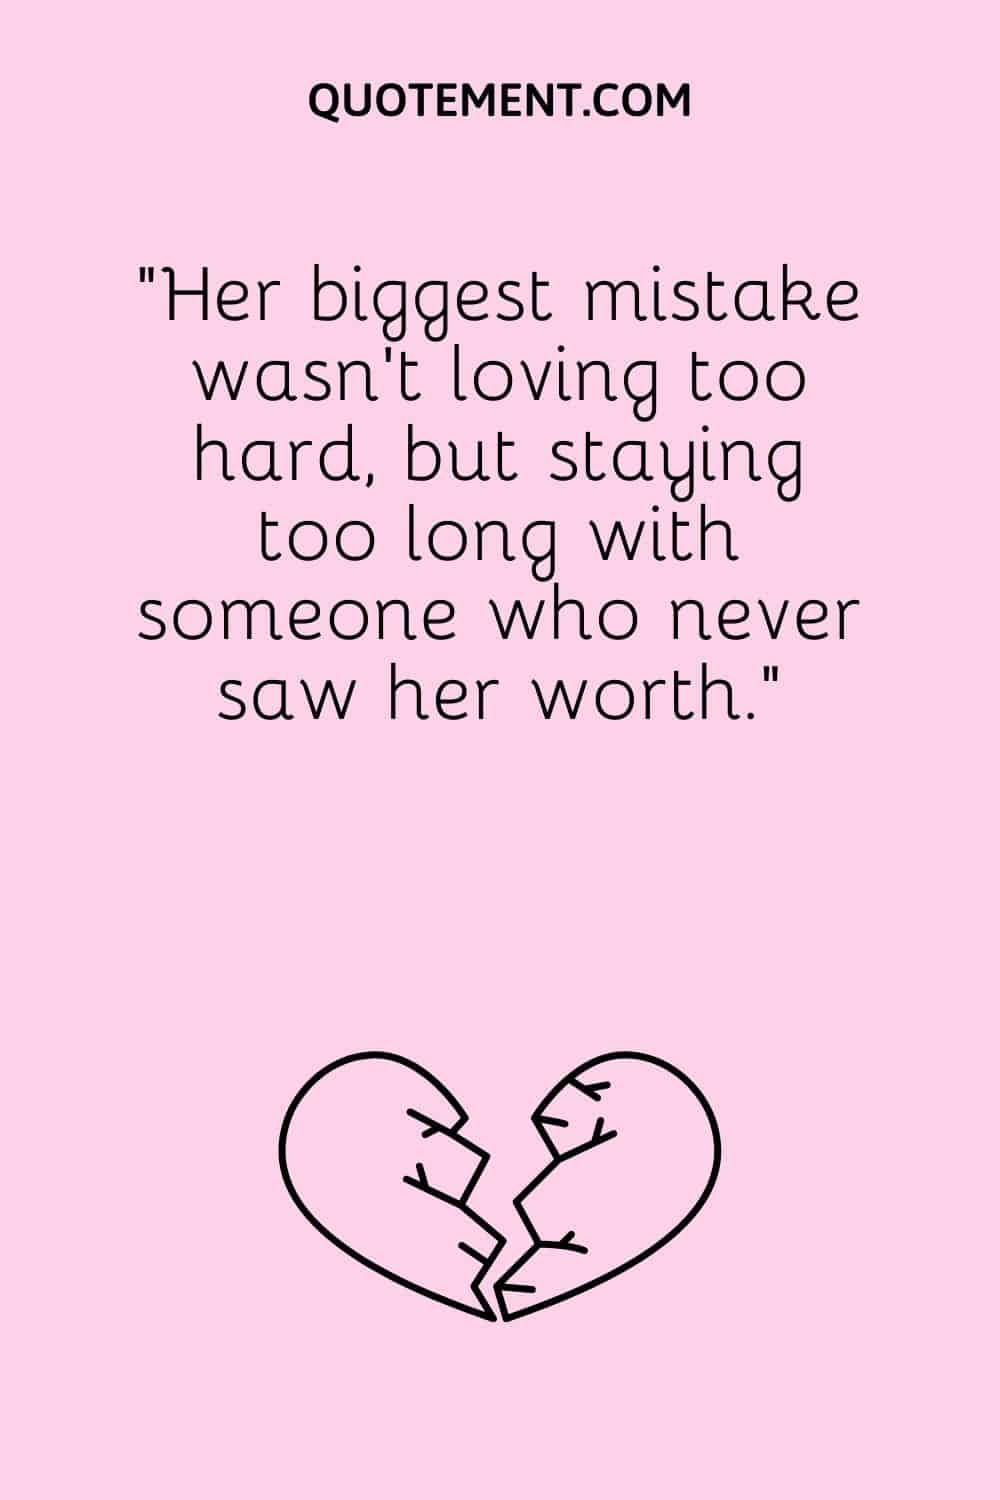 “Her biggest mistake wasn't loving too hard, but staying too long with someone who never saw her worth.”